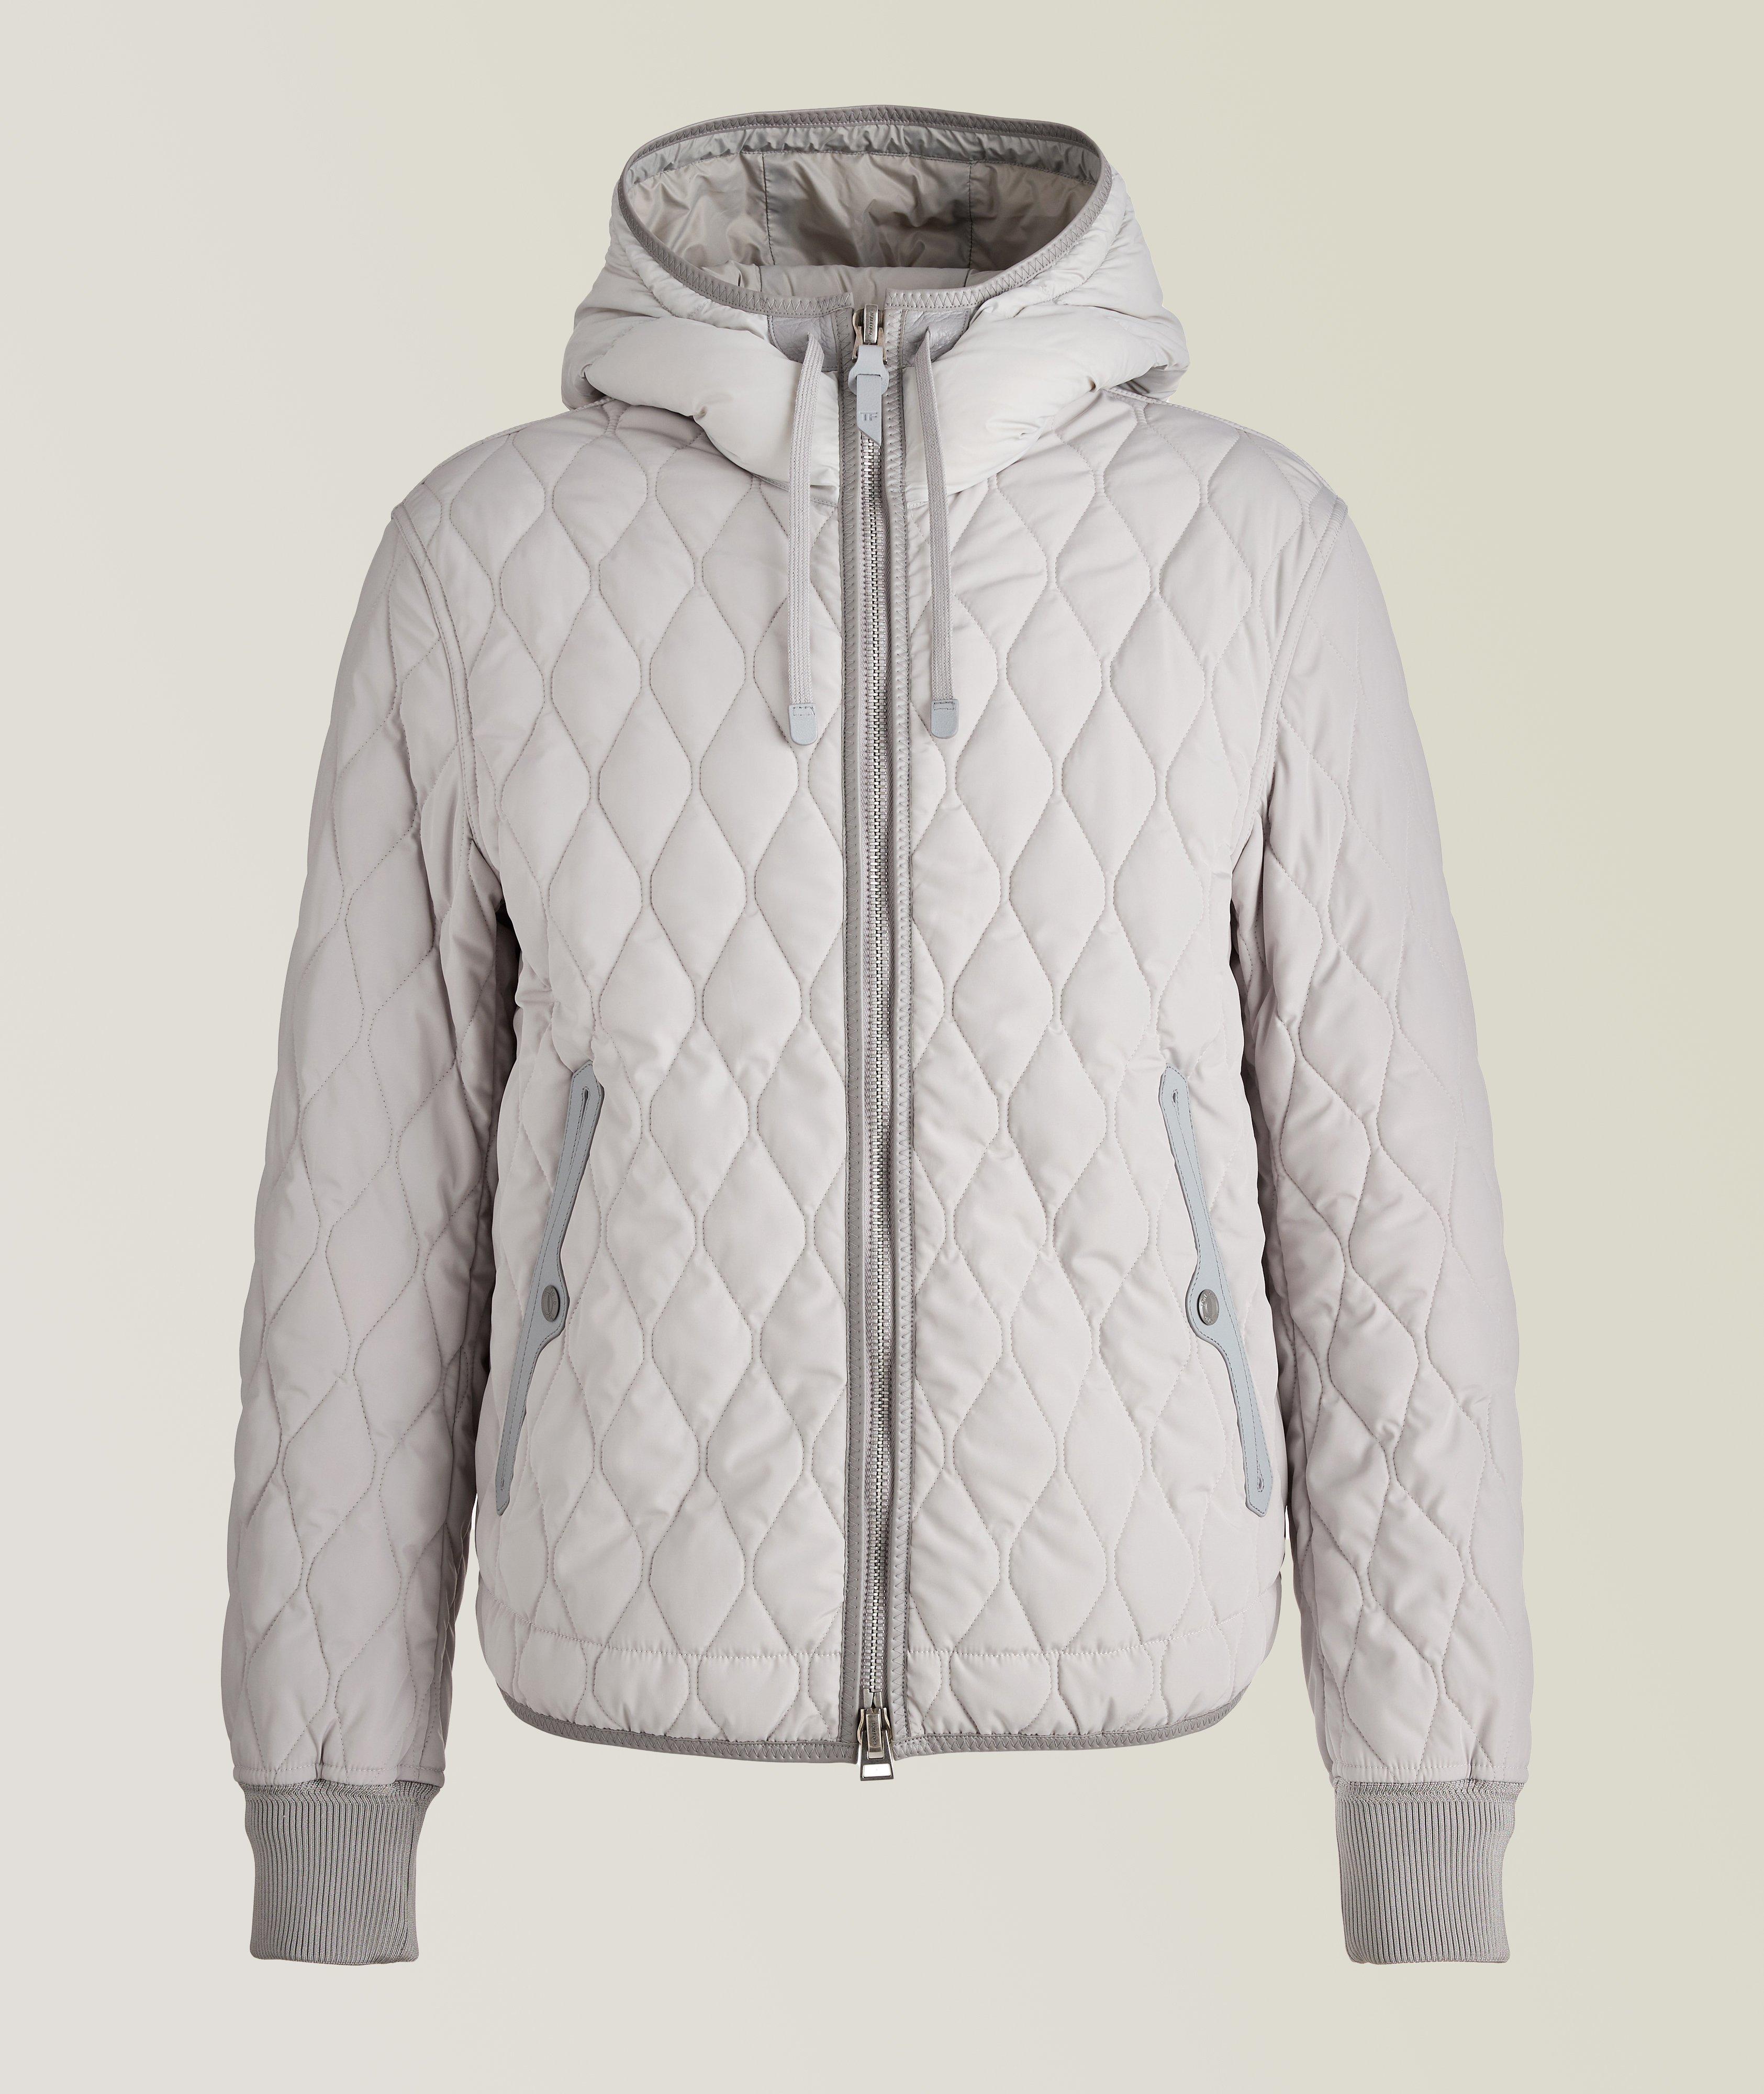 Technical Quilt Hooded Down Jacket image 0